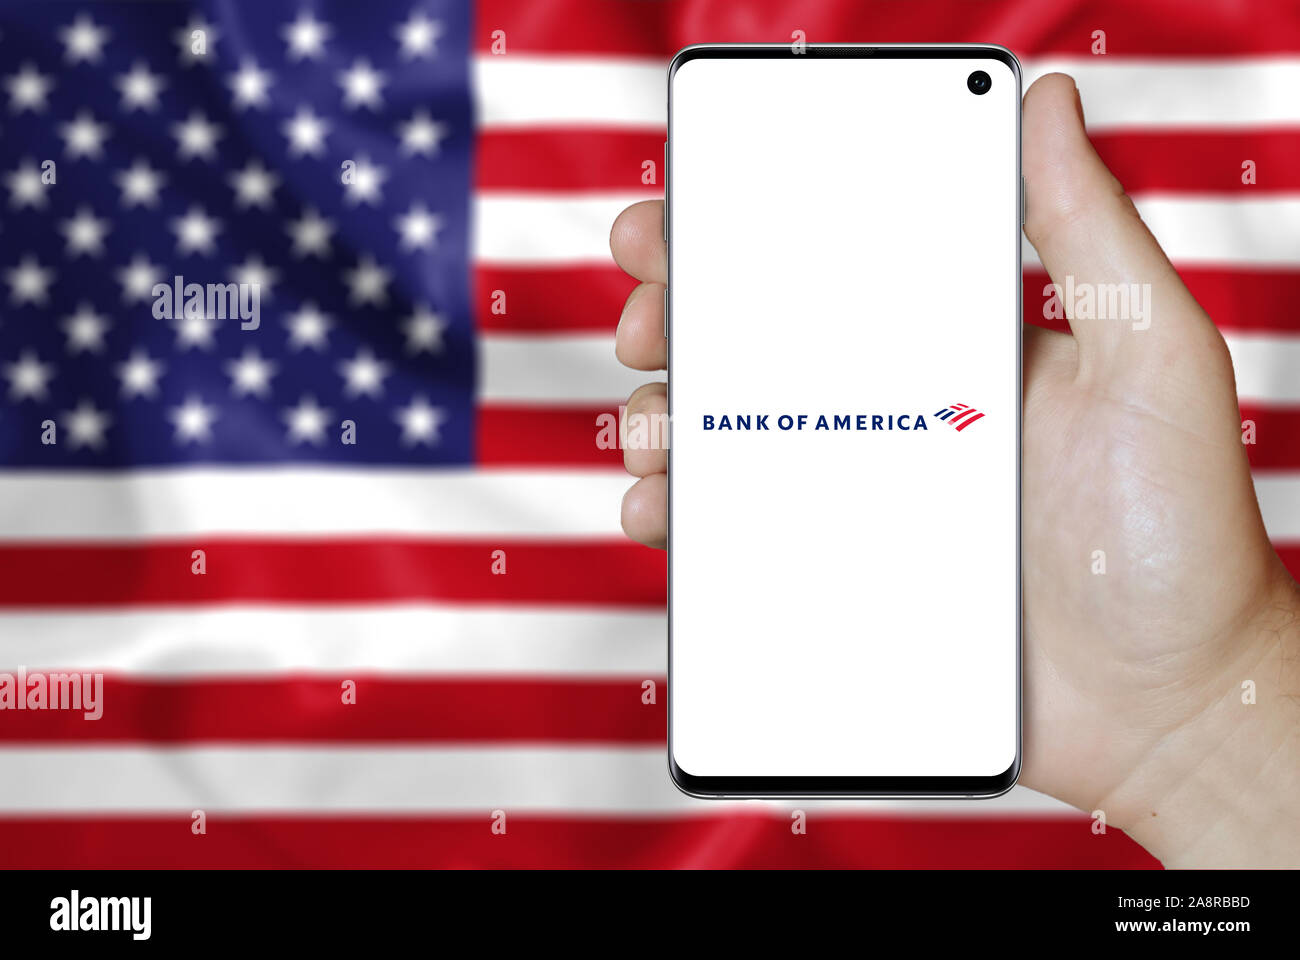 Logo of public company Bank of America Corp displayed on a smartphone. Flag of USA background. Credit: PIXDUCE Stock Photo